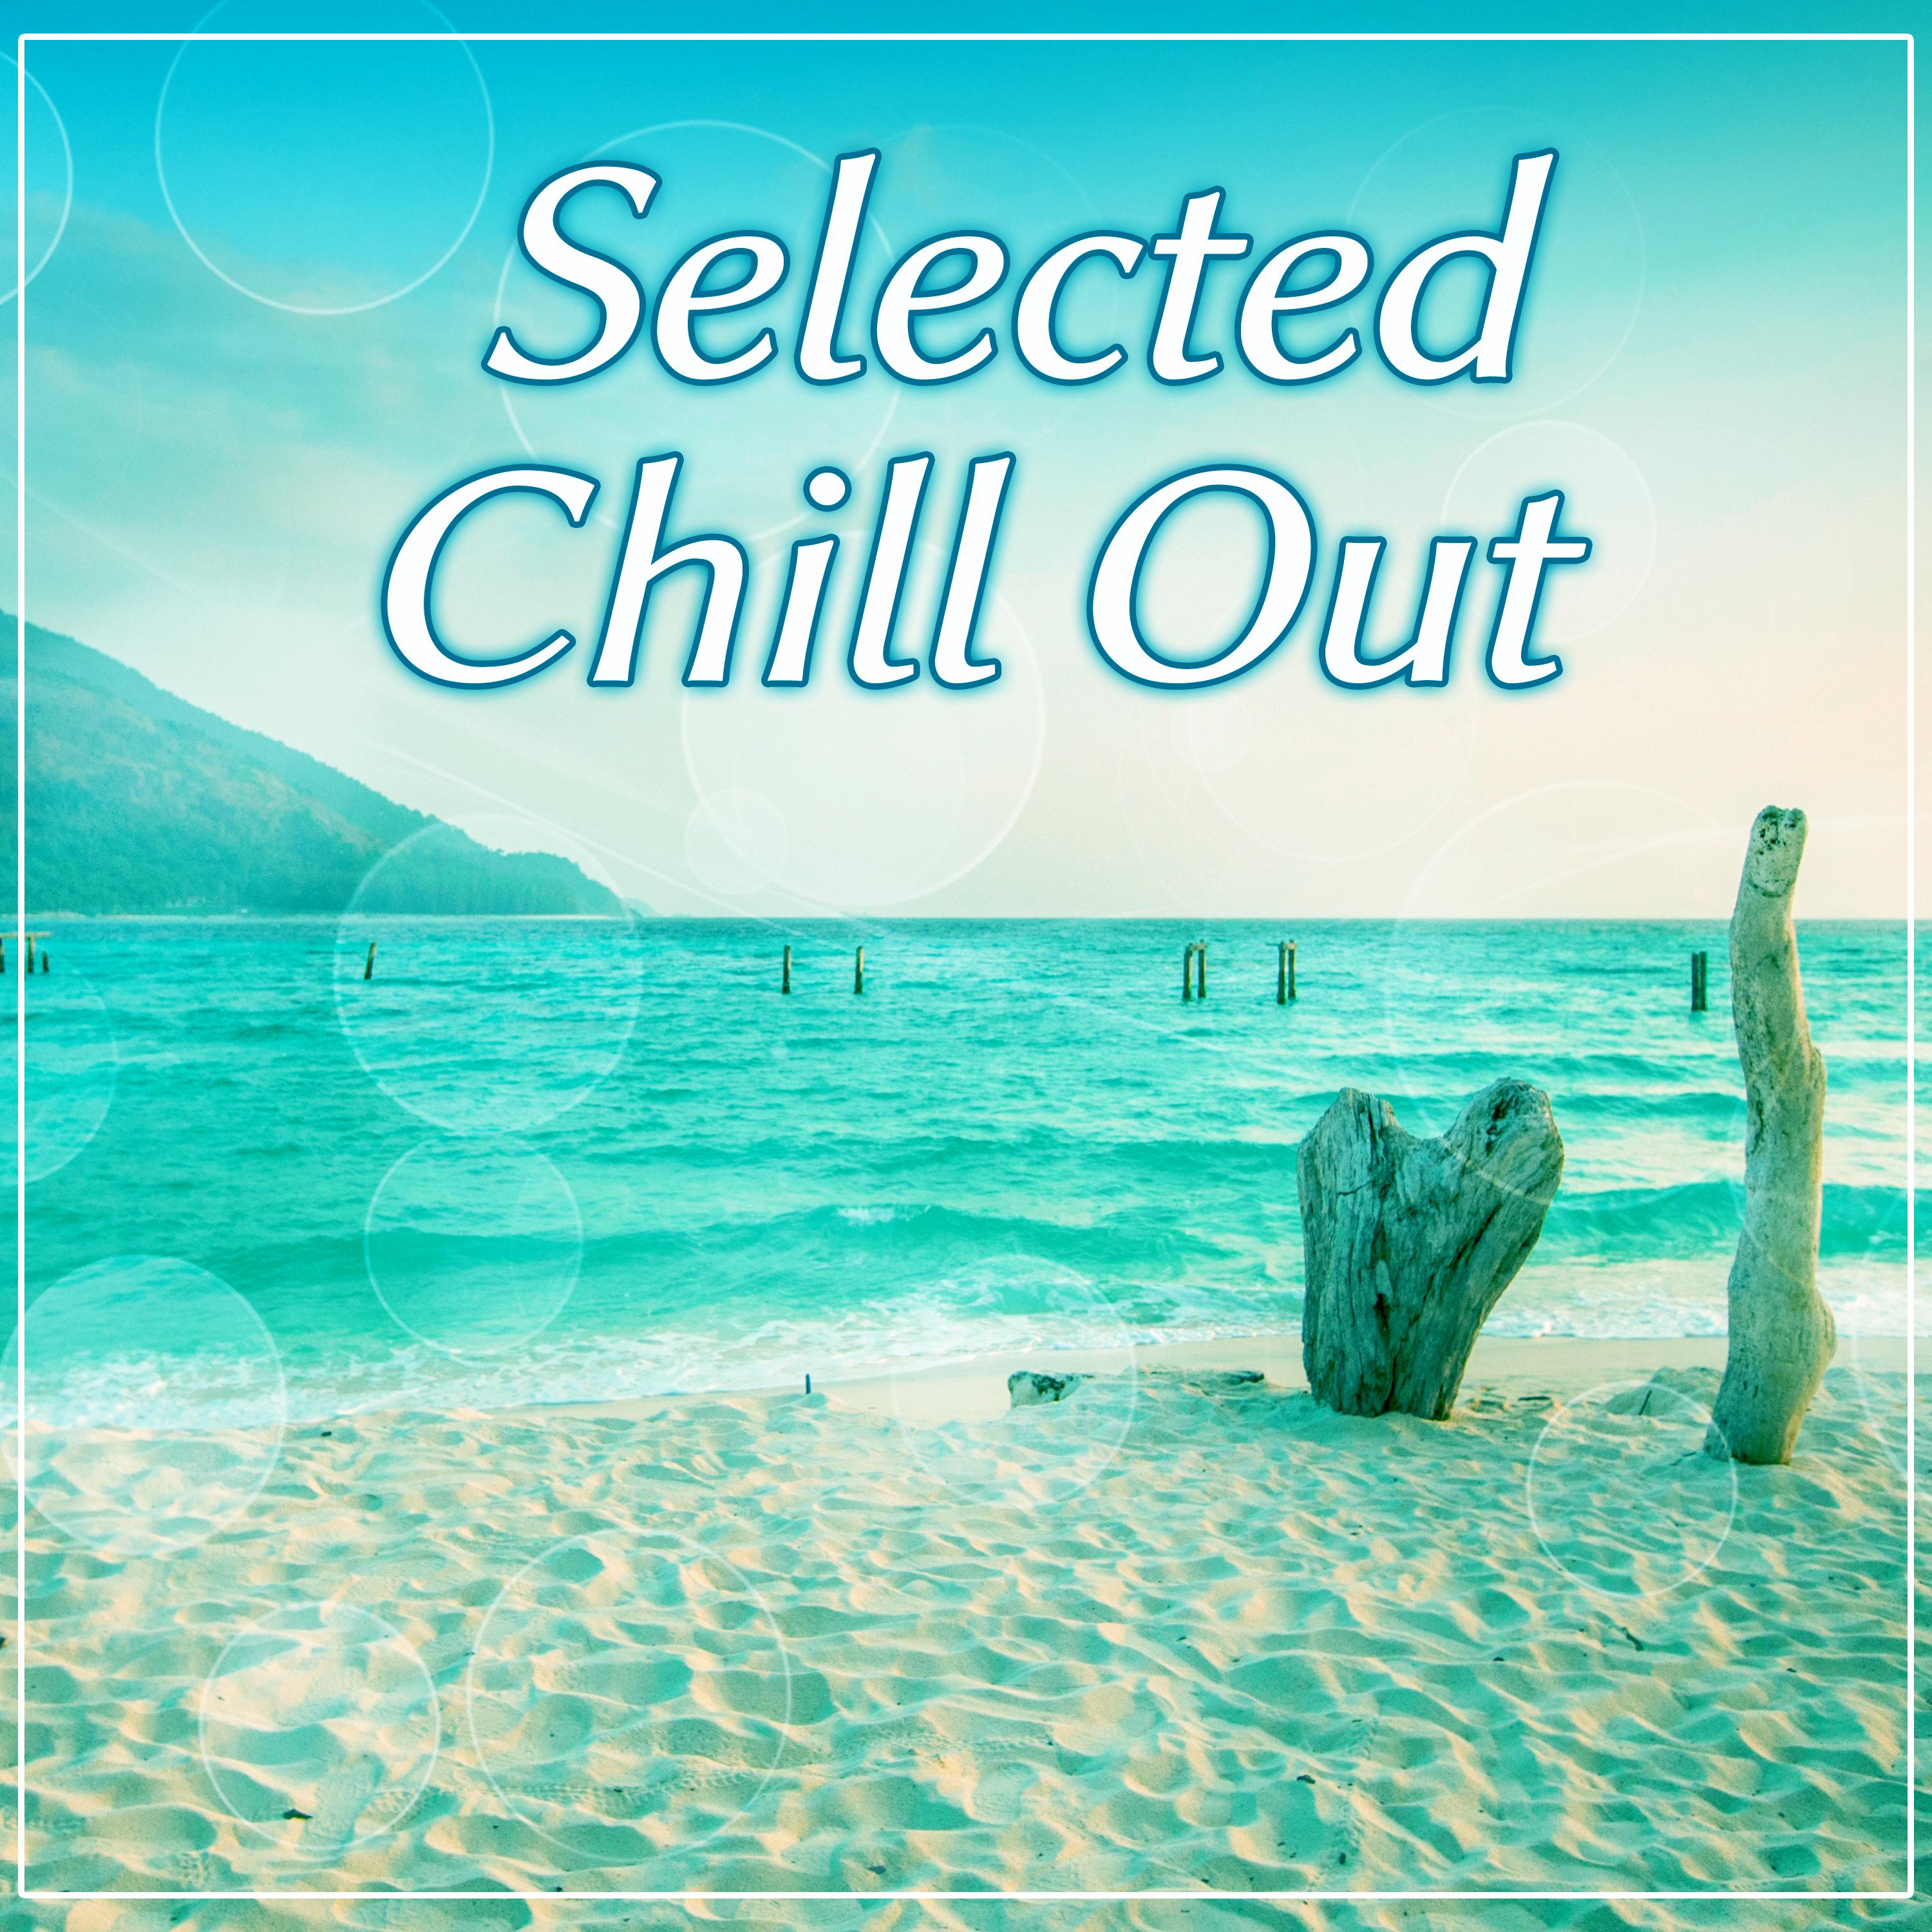 Selected Chill Out  Ambient Electronic Music, Ibiza Selected Chill Out, Finest Selection, Rest, Chill  Out 2016, Bar Lounge